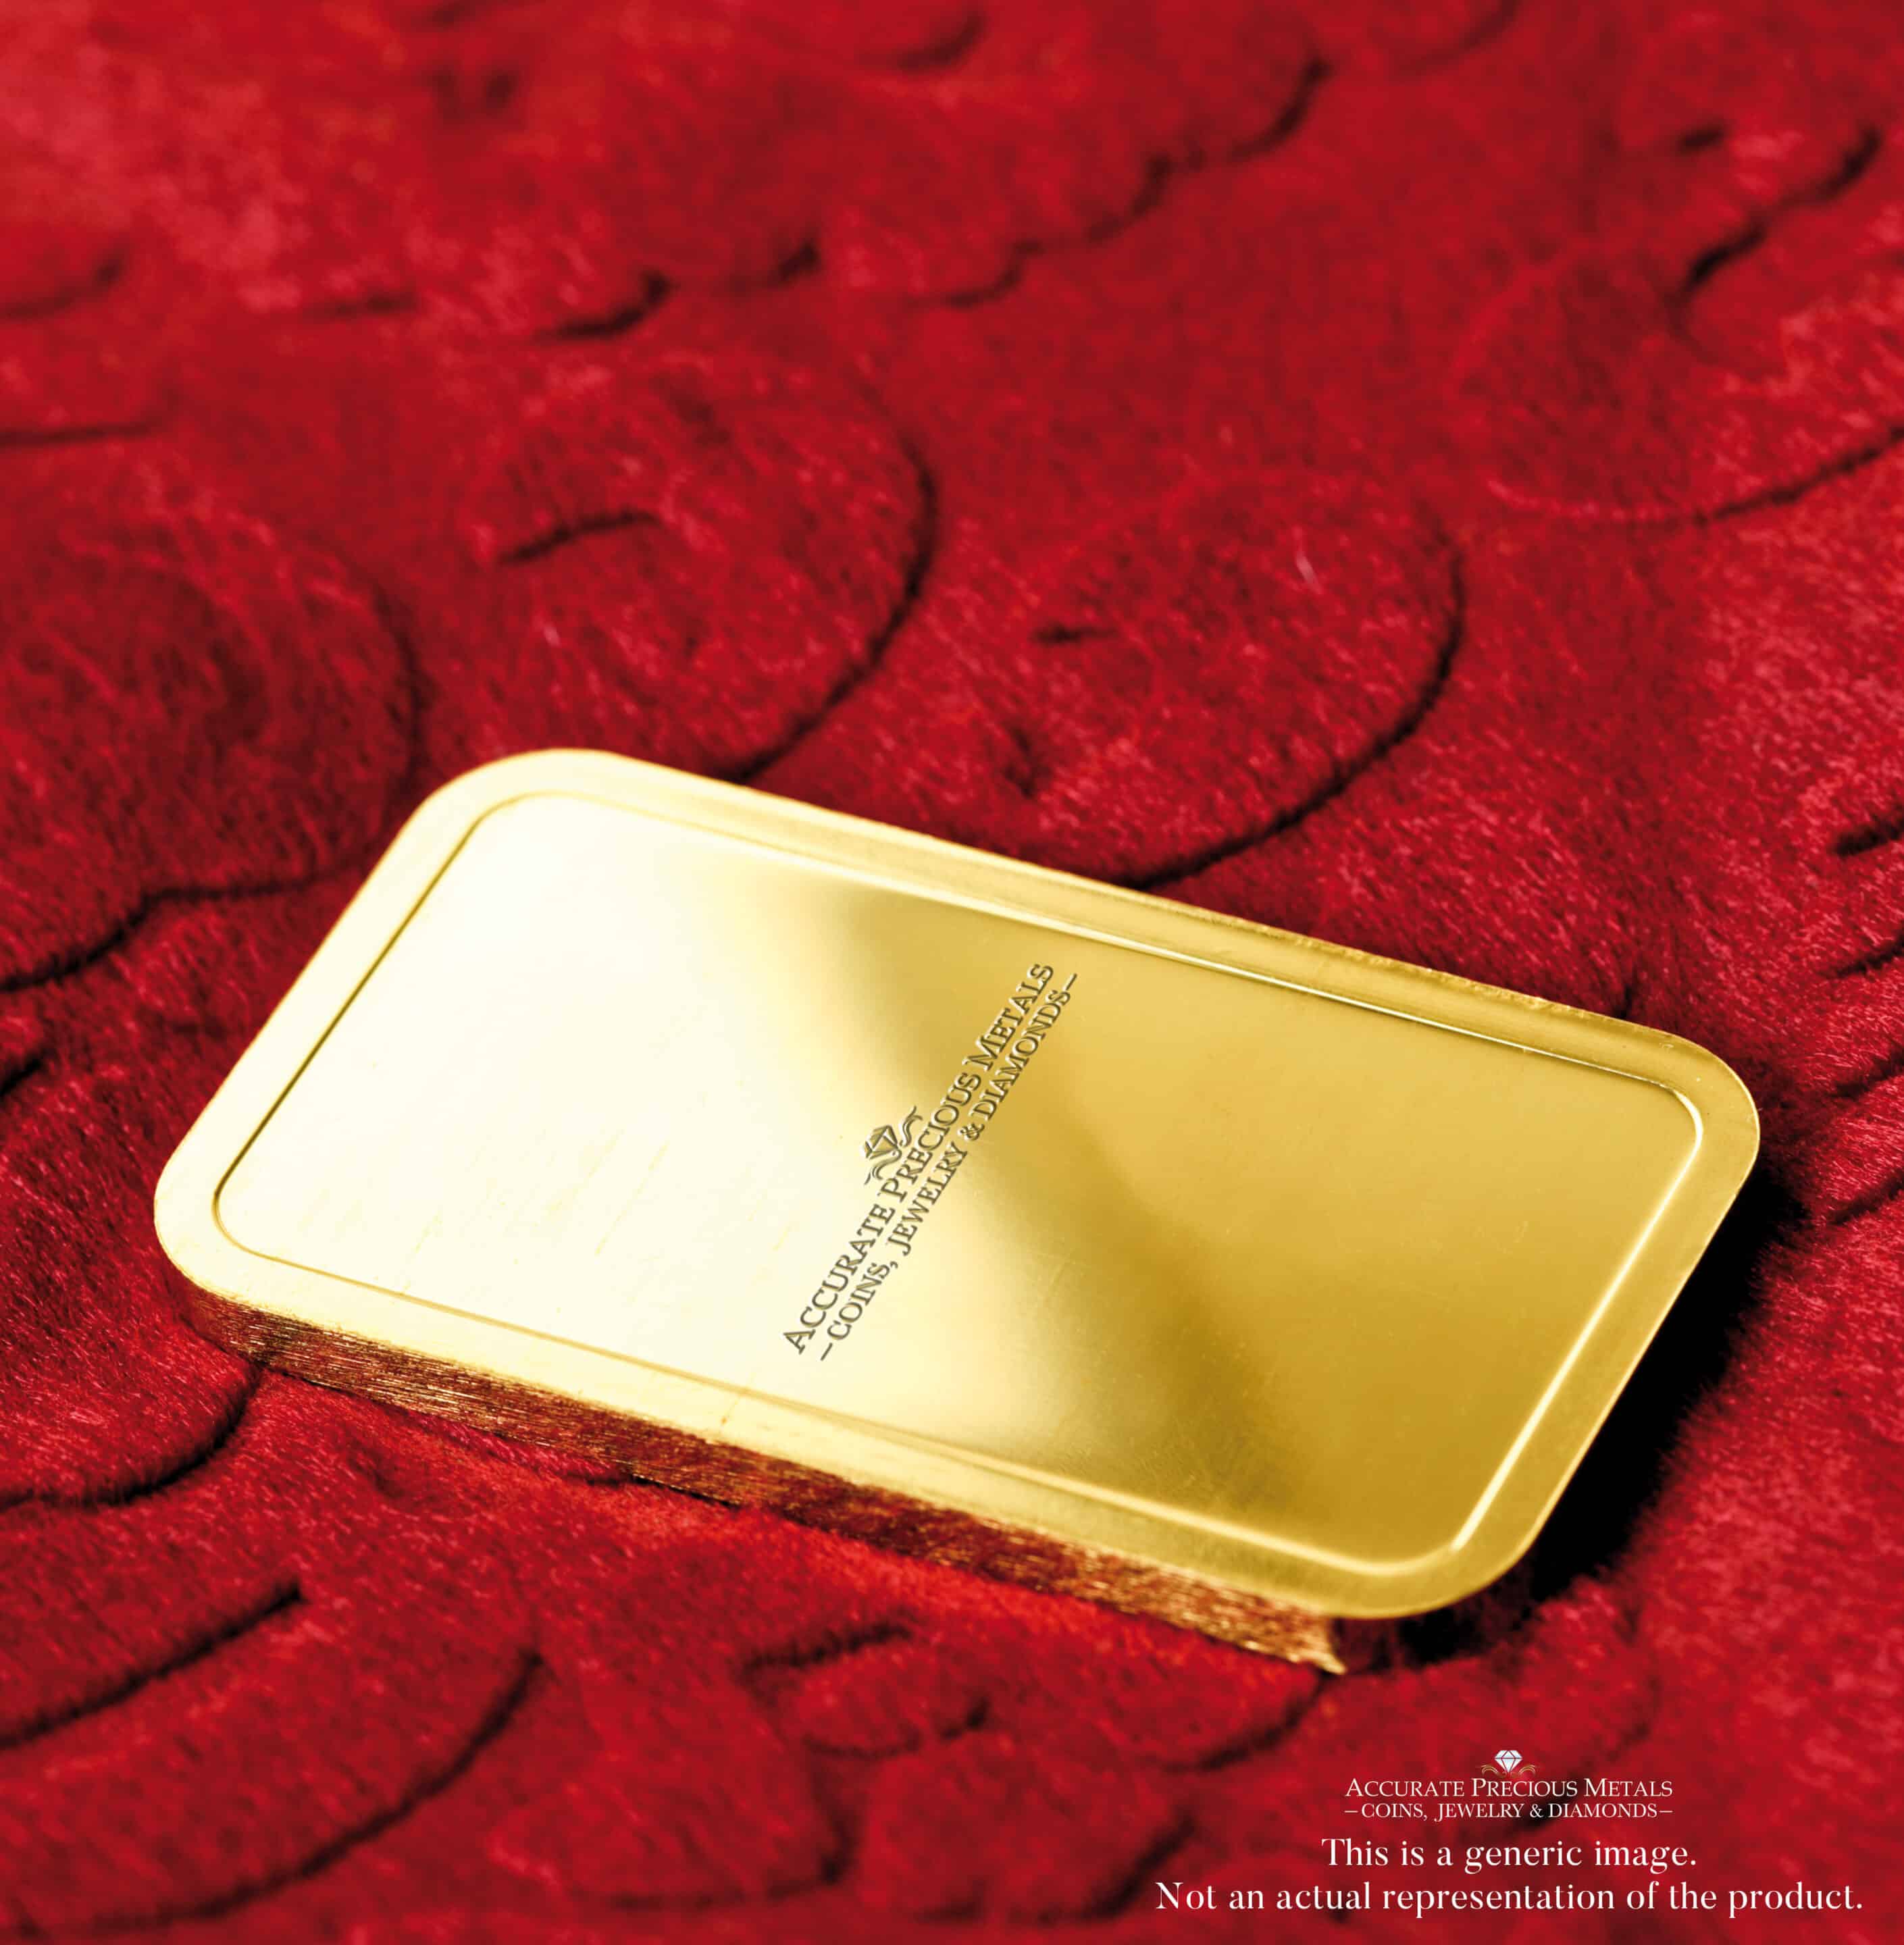 Secure Your Wealth with Credit Suisse 1/4 oz Gold Bar - Trusted and Recognized Worldwide